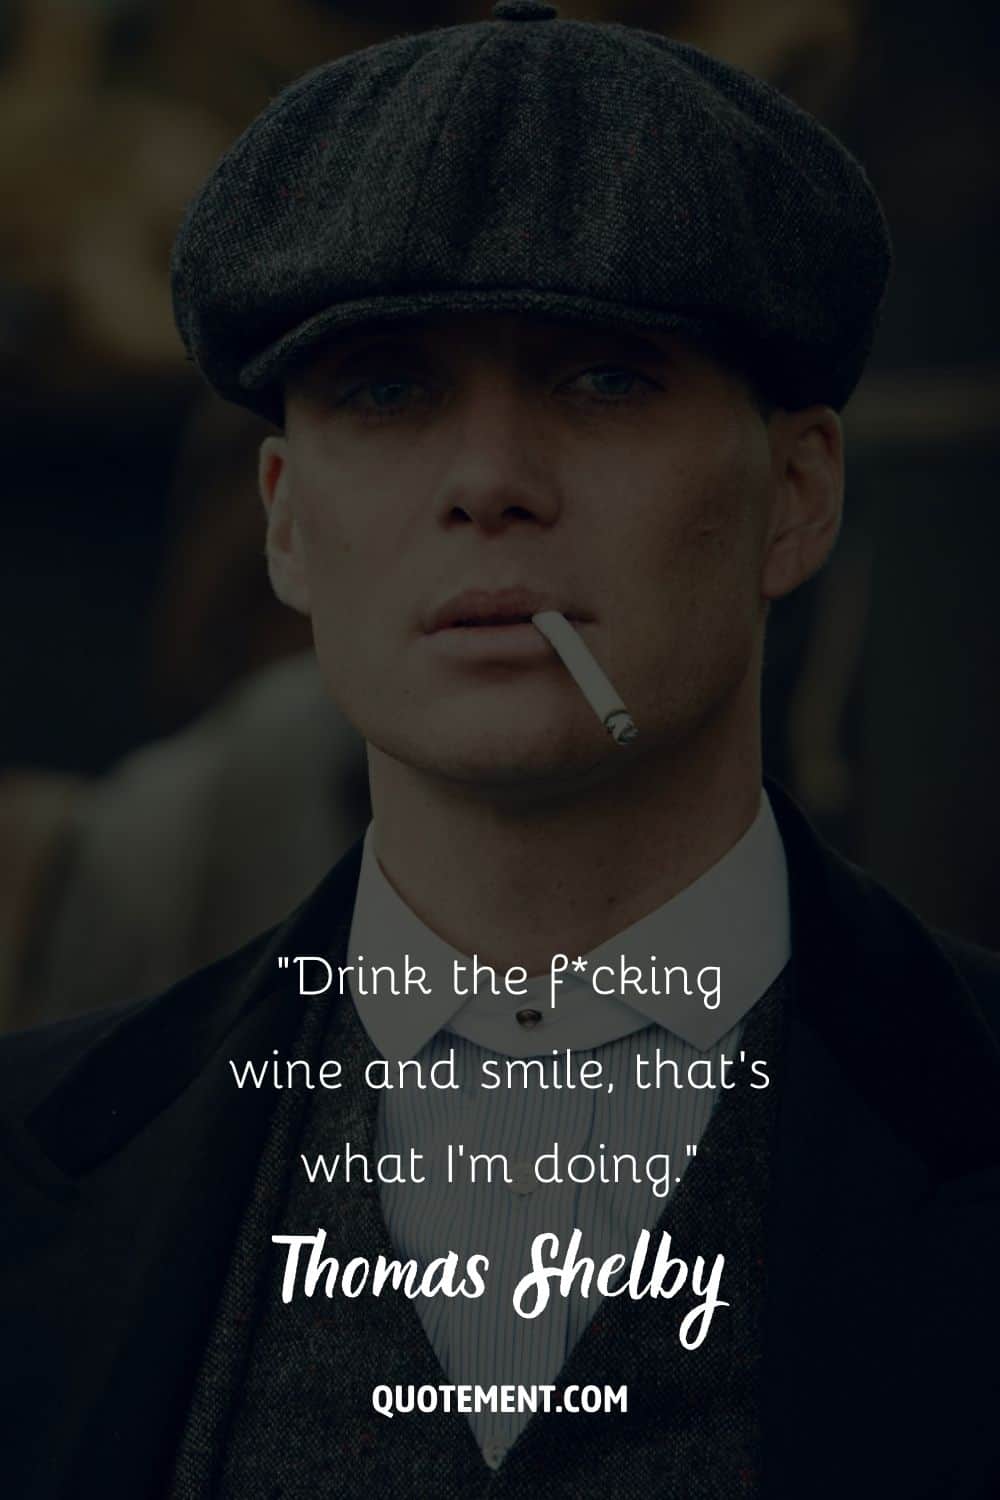 Cillian Murphy rocks the Peaky Blinder look while representing peaky blinders quote thomas shelby
